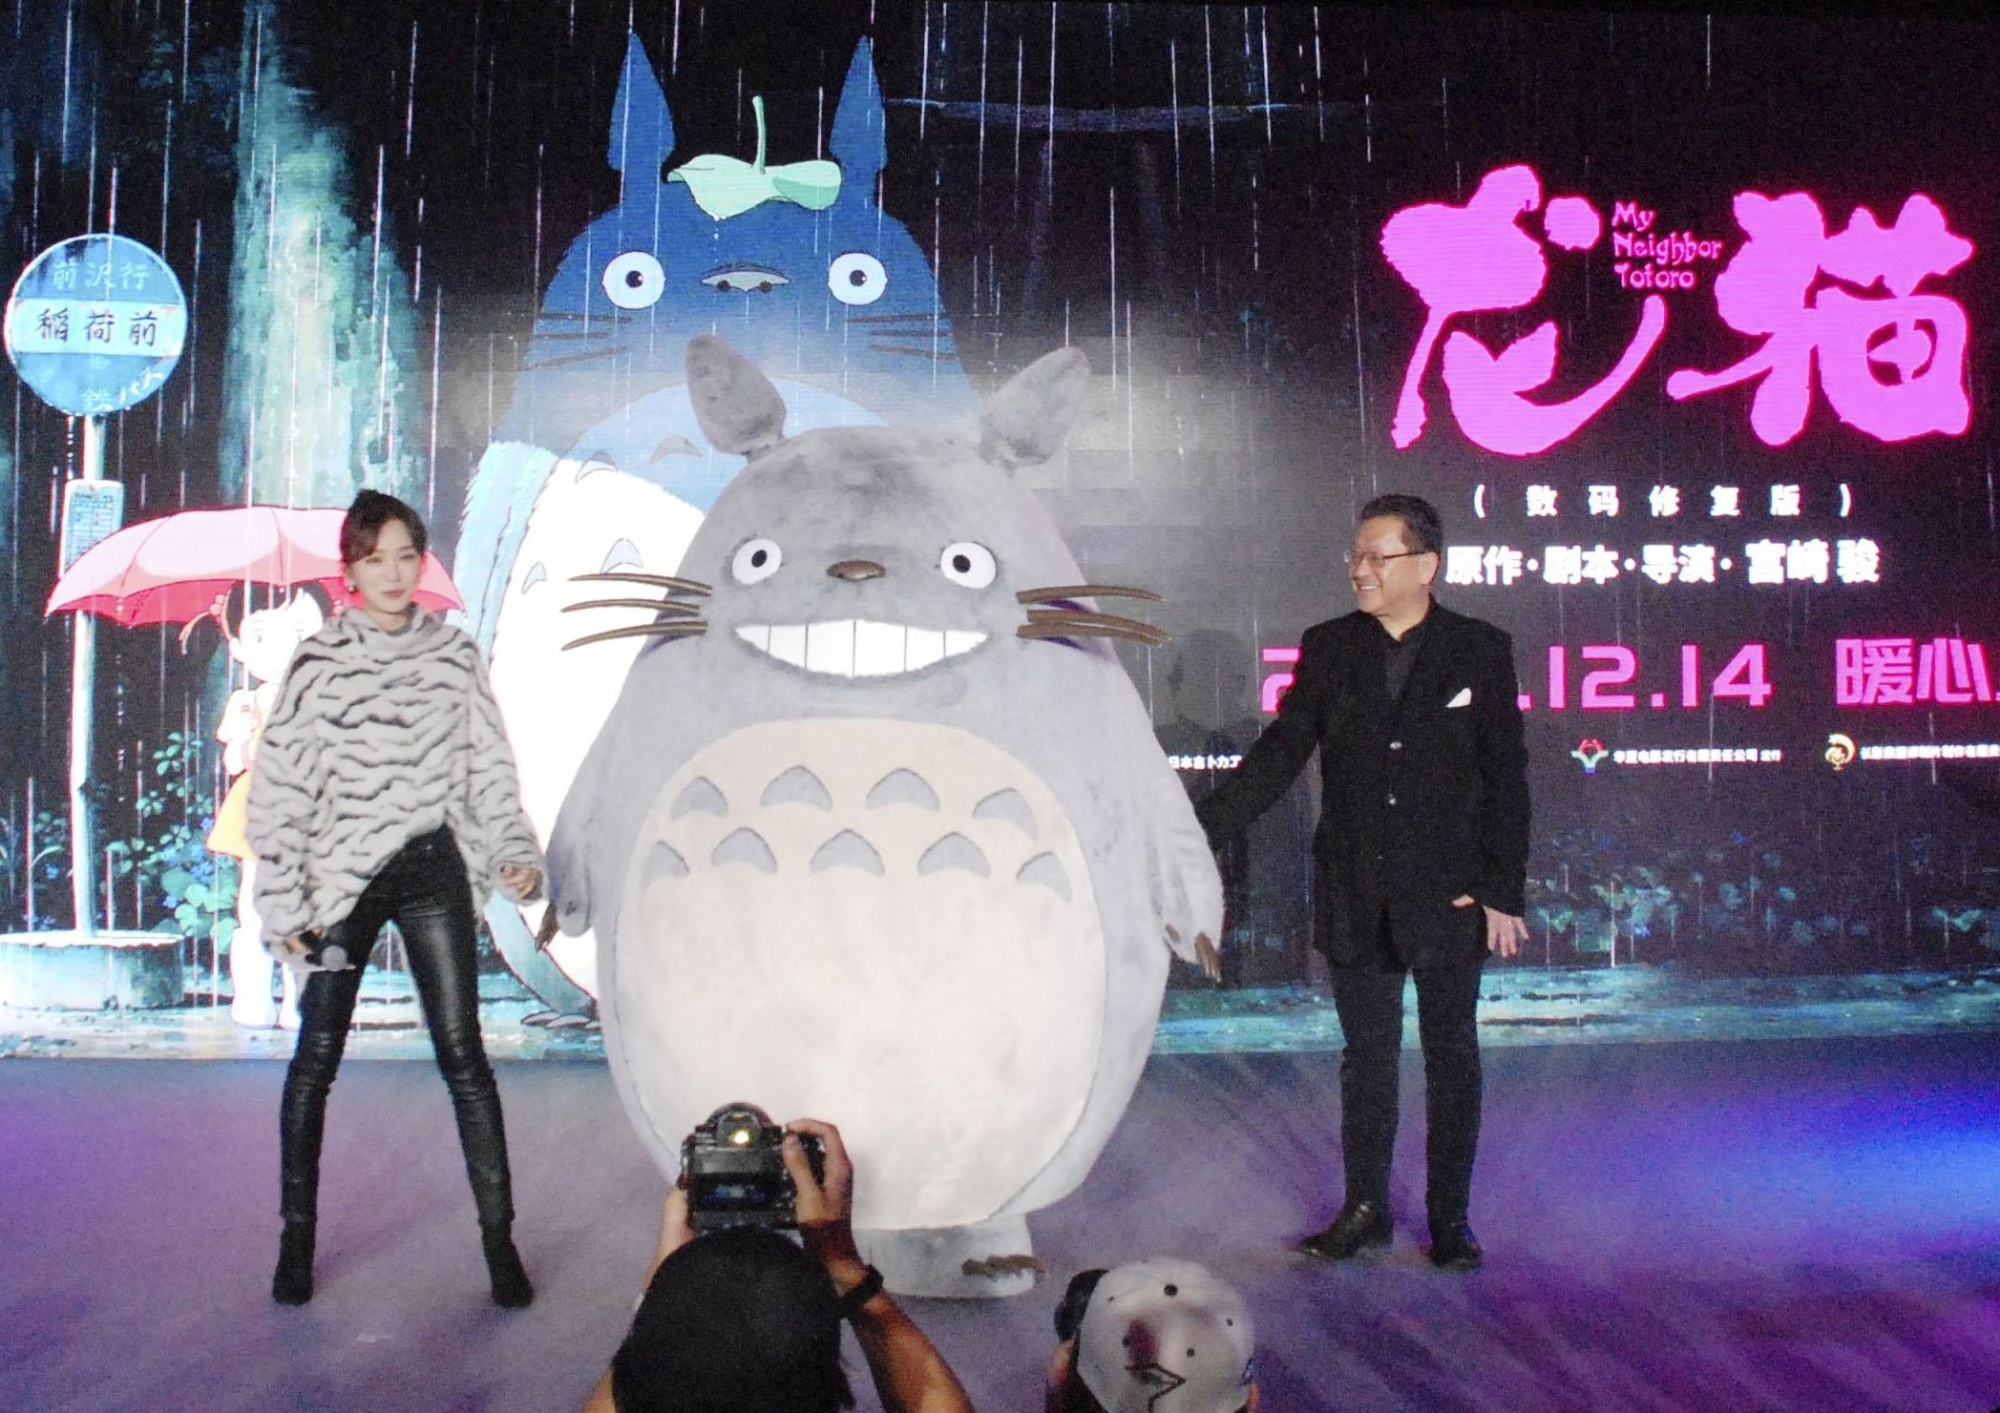 Koji Hoshino (right), chairman of Studio Ghibli Inc., appears at an event in Shanghai on Monday to announce that 'My Neighbor Totoro' will be played at movie theaters in China from Dec. 14. | KYODO